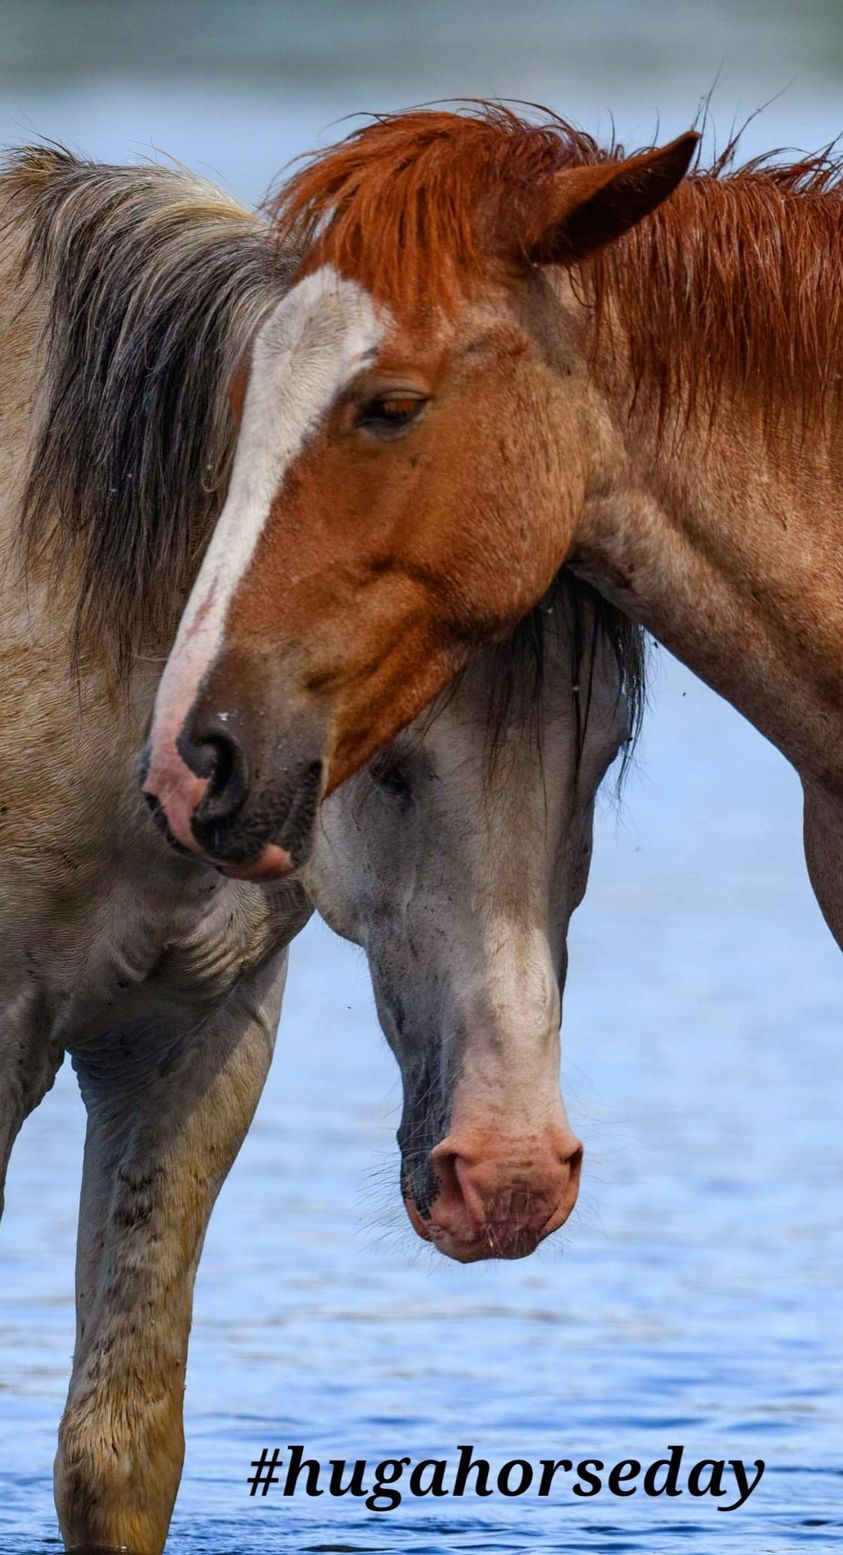 It’s National Hug a Horse Day!